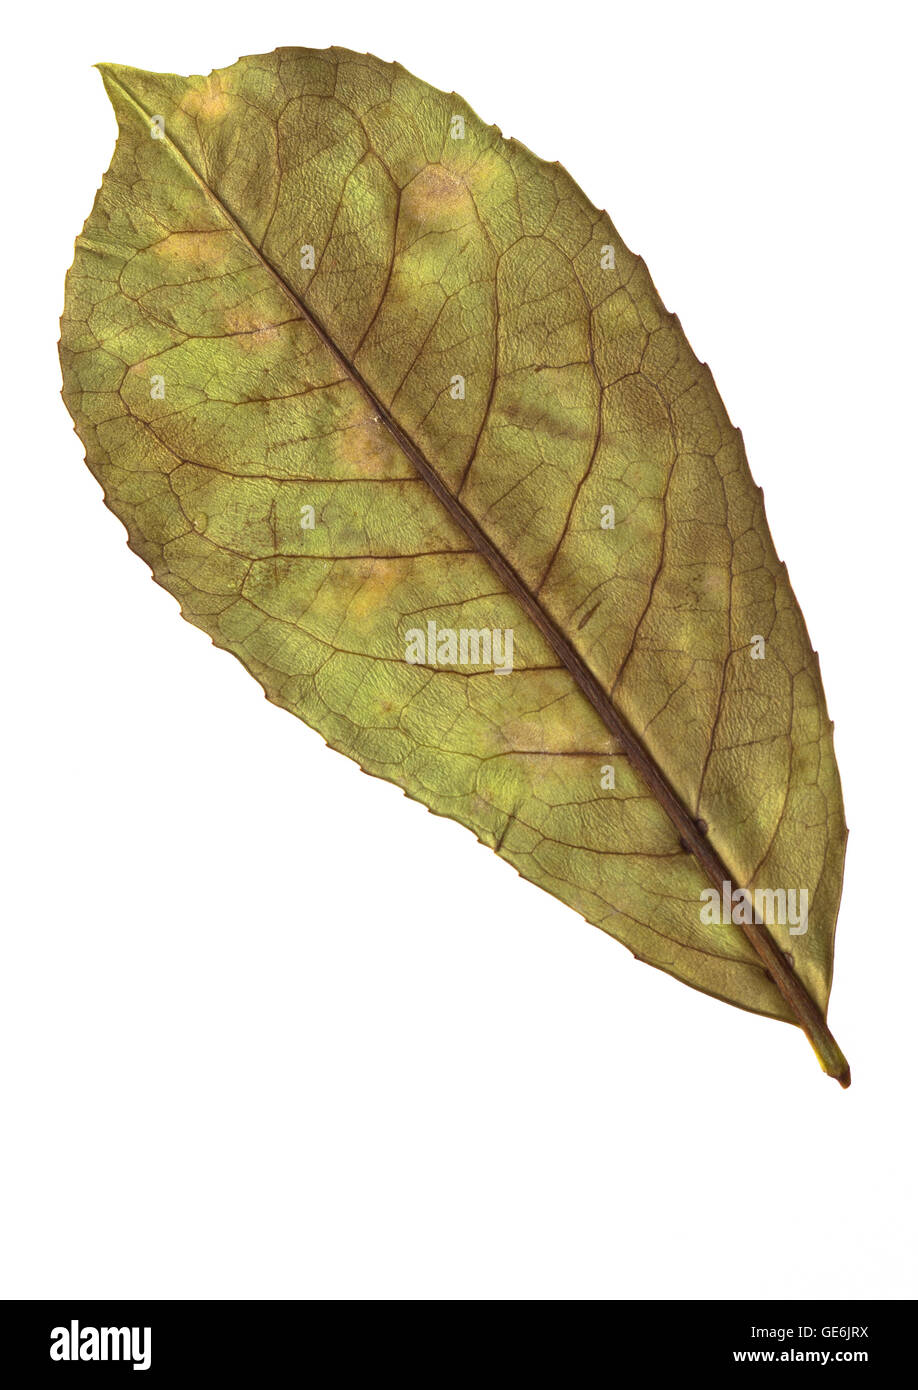 reverse side of dried pressed leaf in obovate shape Stock Photo